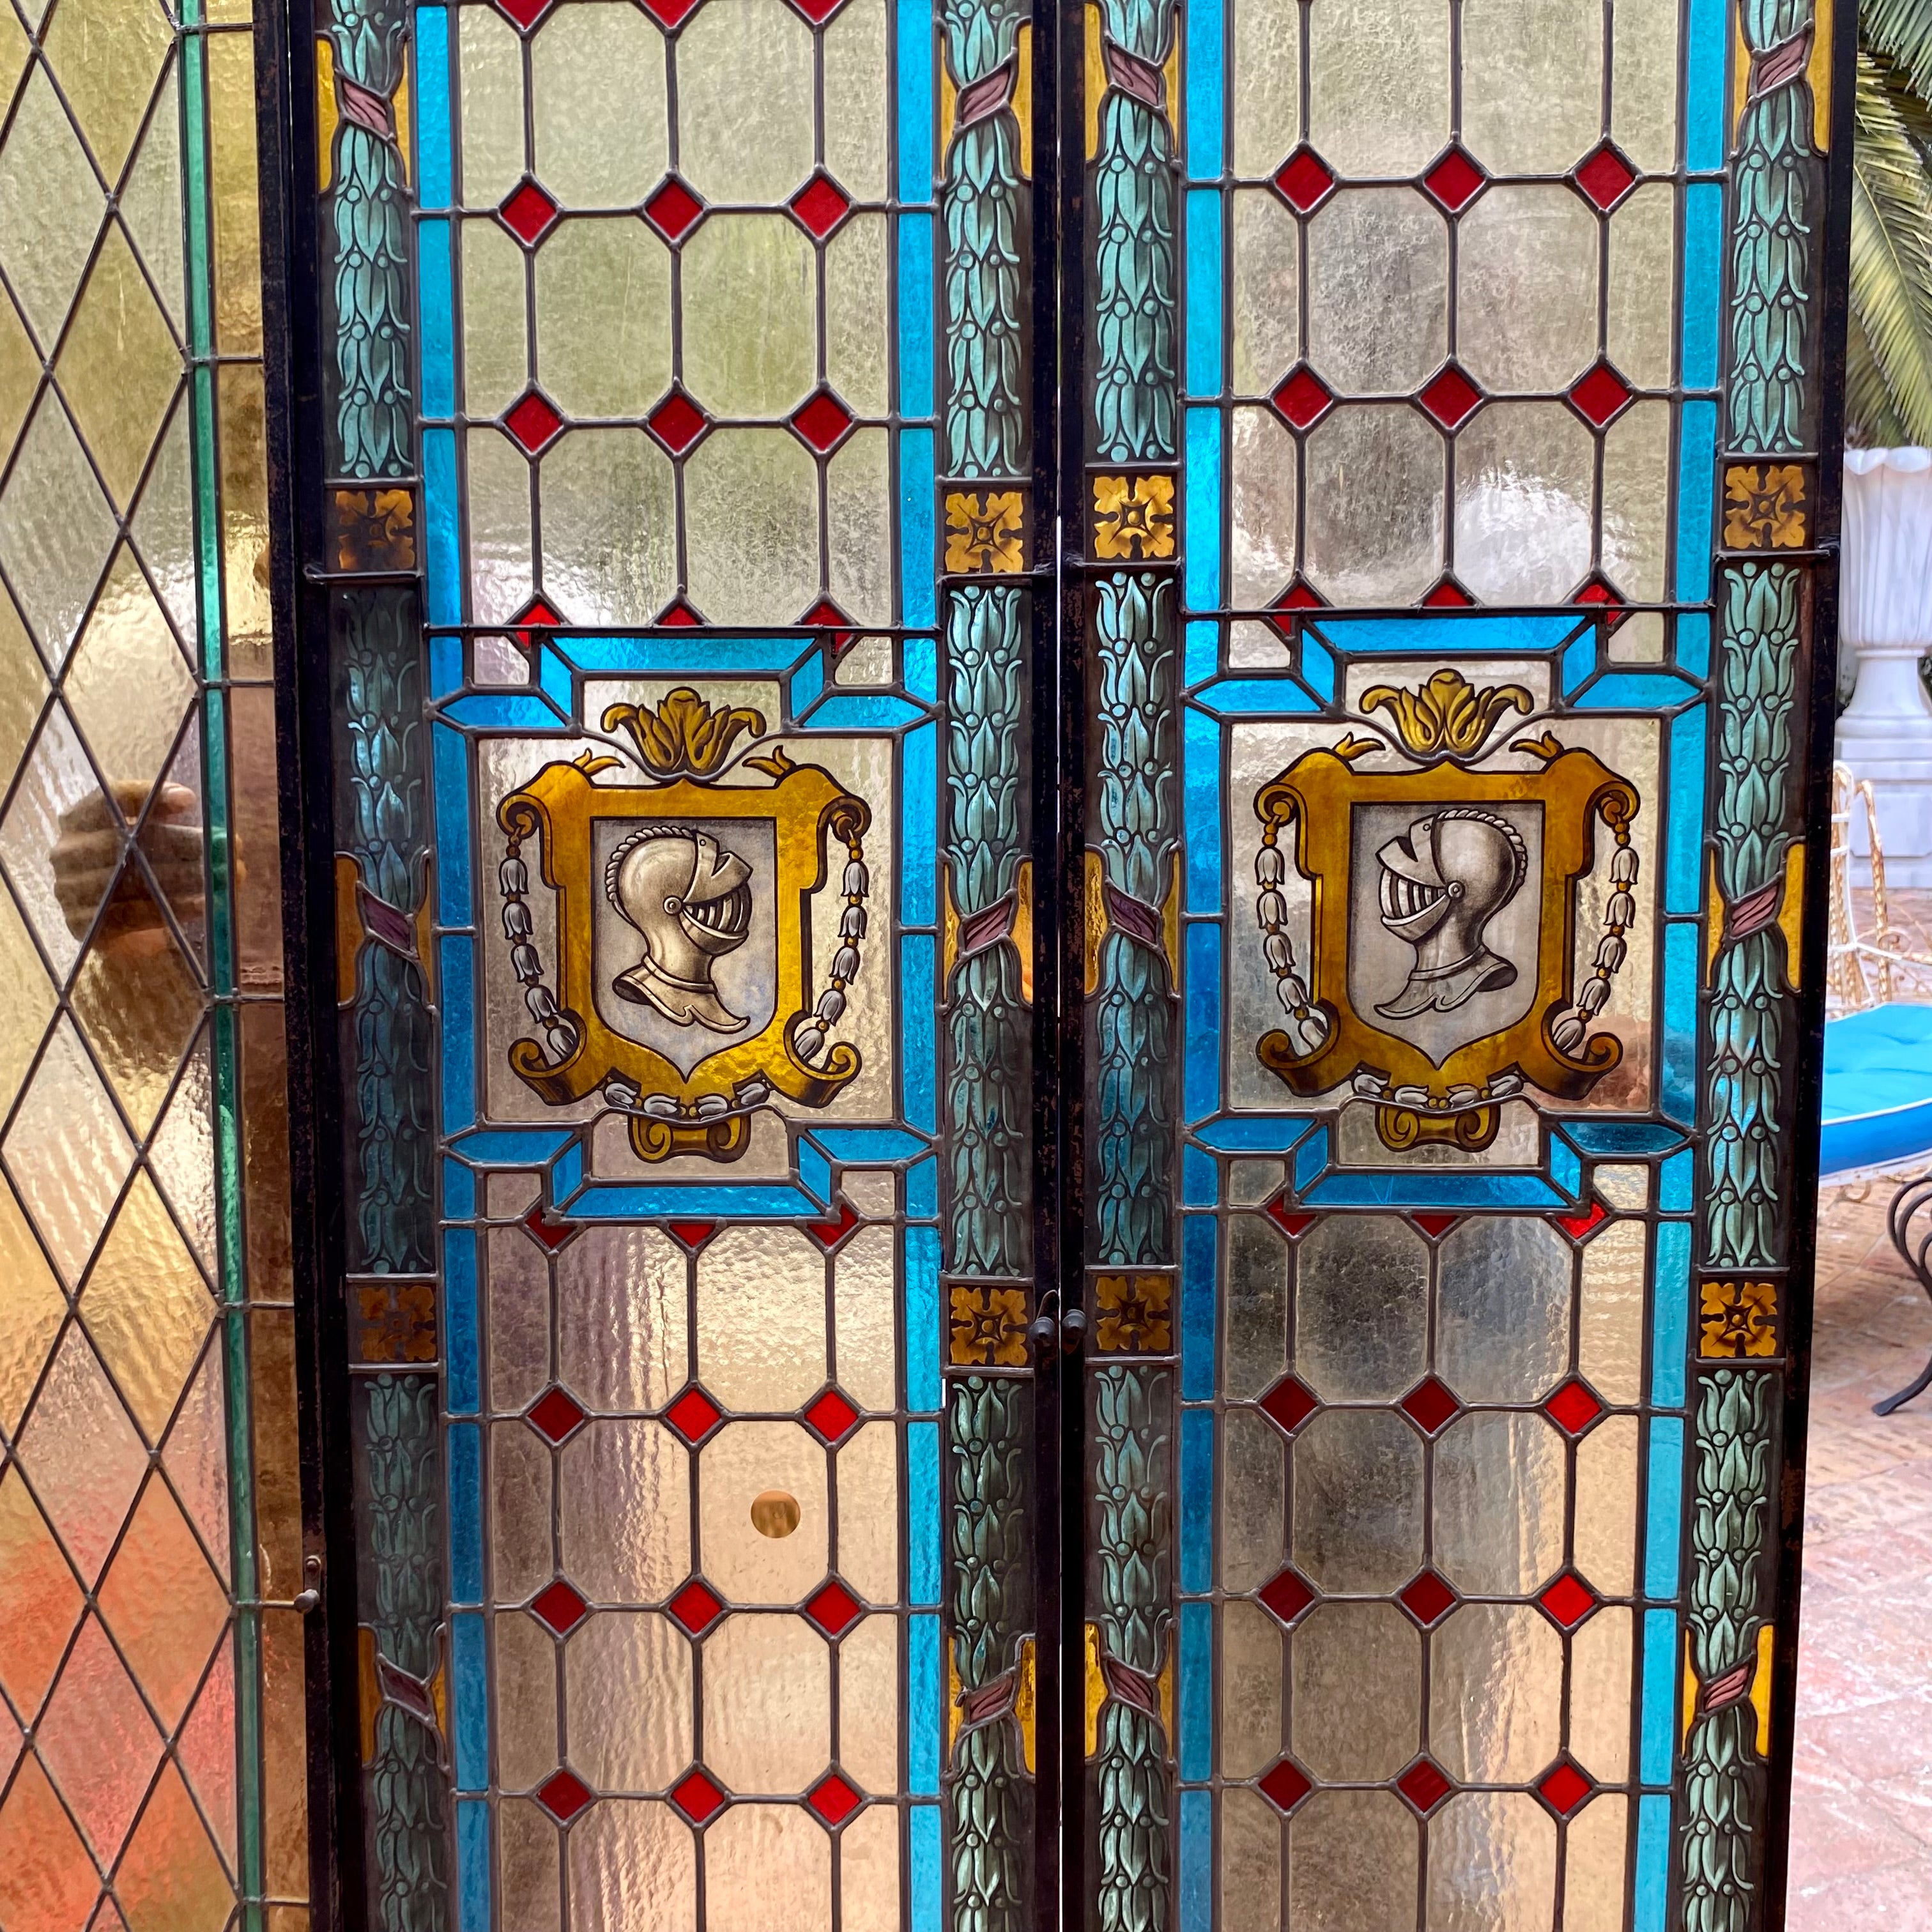 Beautiful Pair of Stained Glass Door Panels with Fanlight